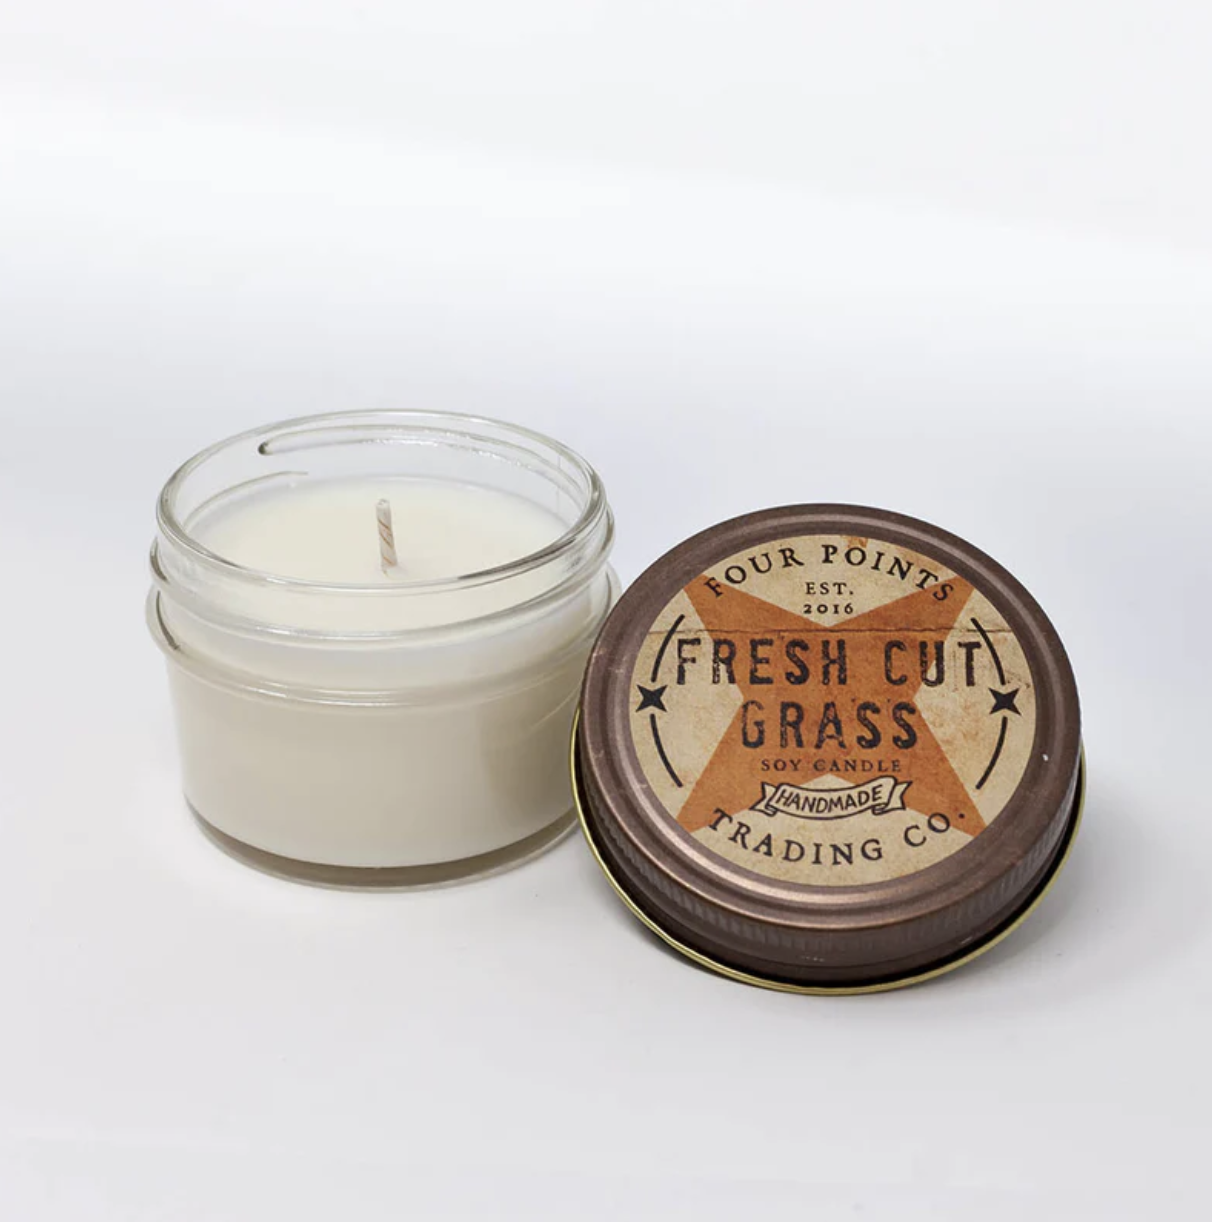 FOUR POINTS TRADING CO FRESH CUT GRASS 4 OZ SOY CANDLE